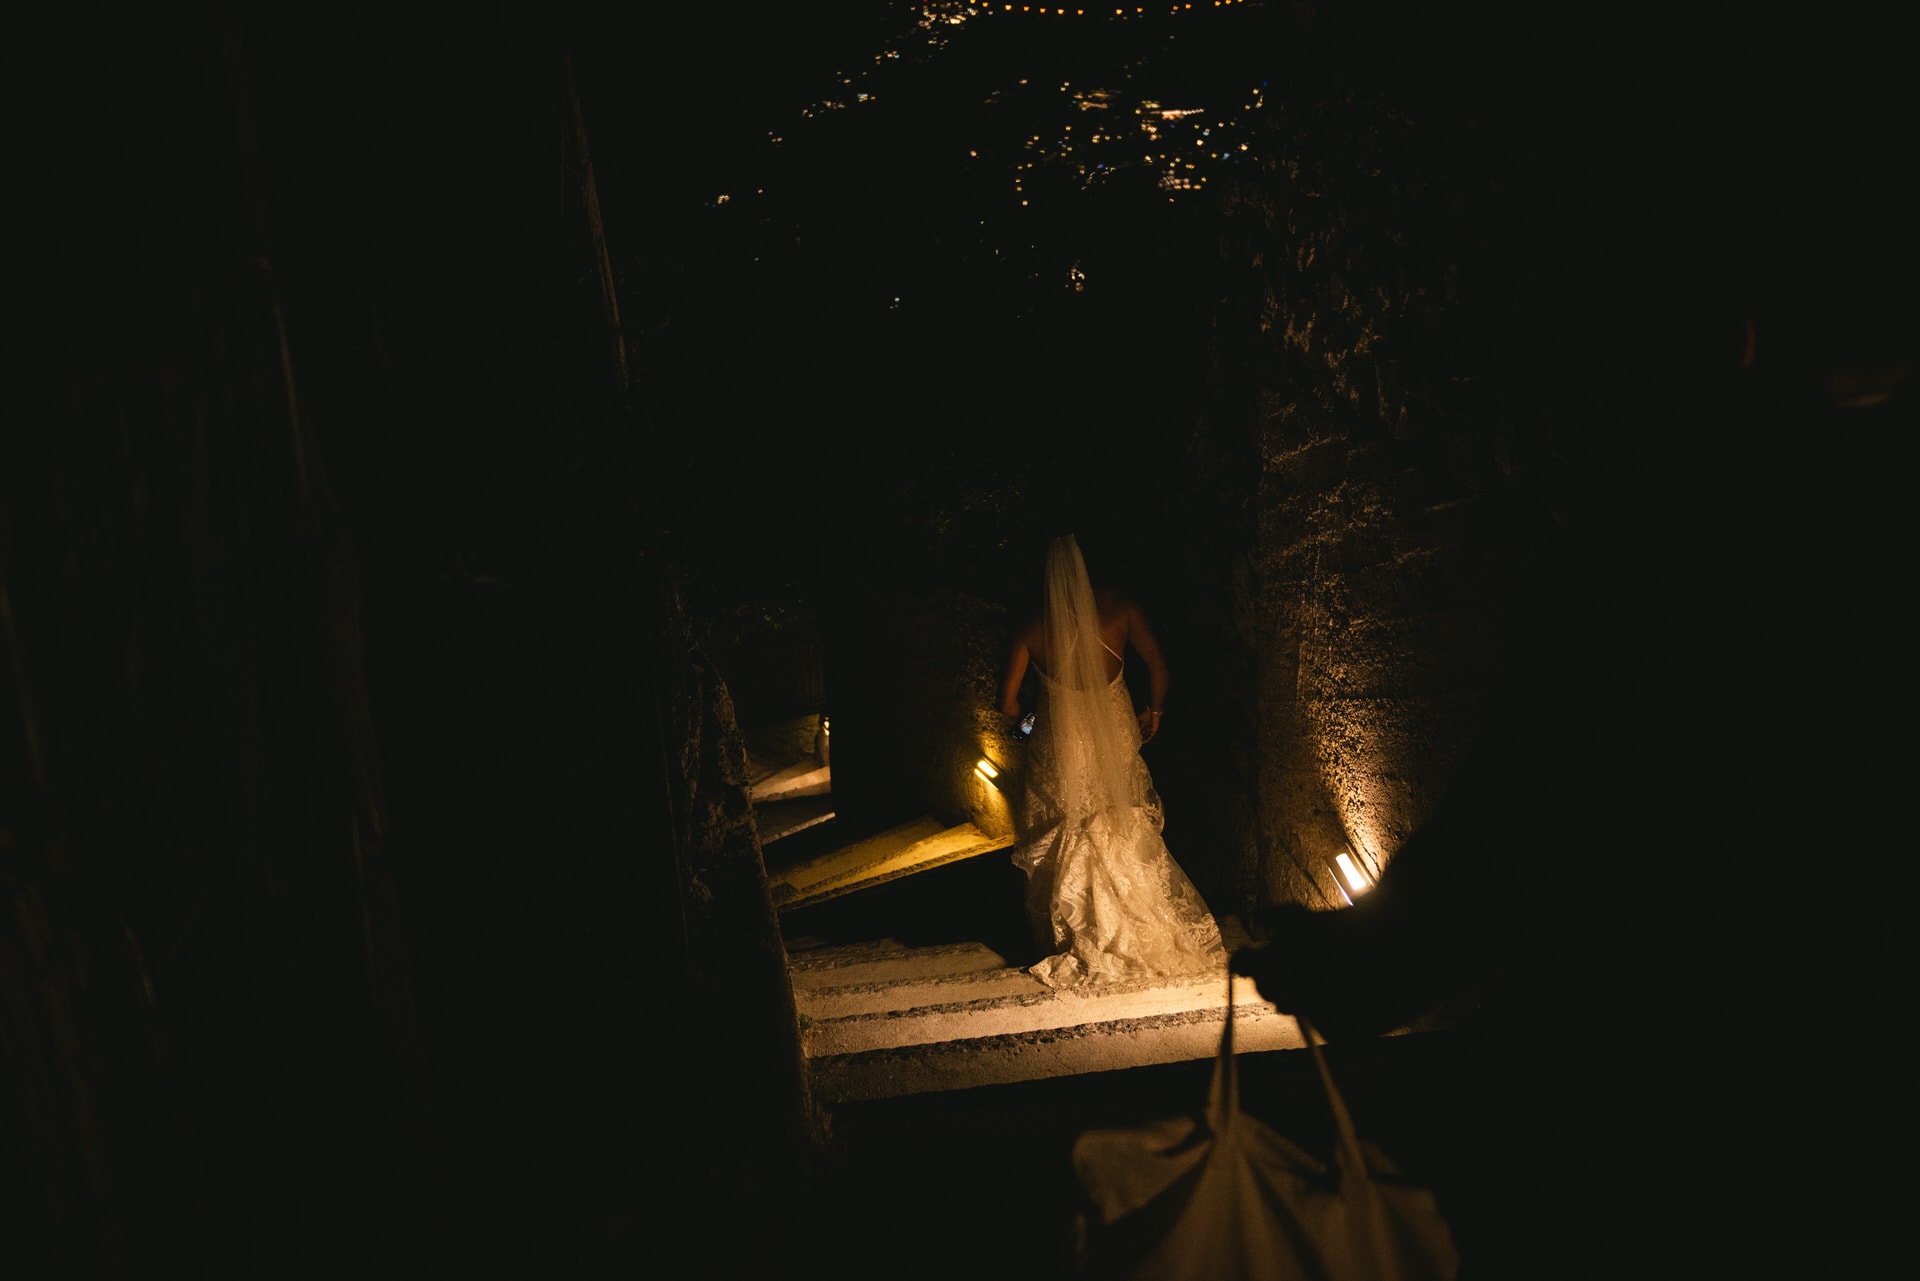 Atmospheric shot of a bride walking down some stairs at night in Positano